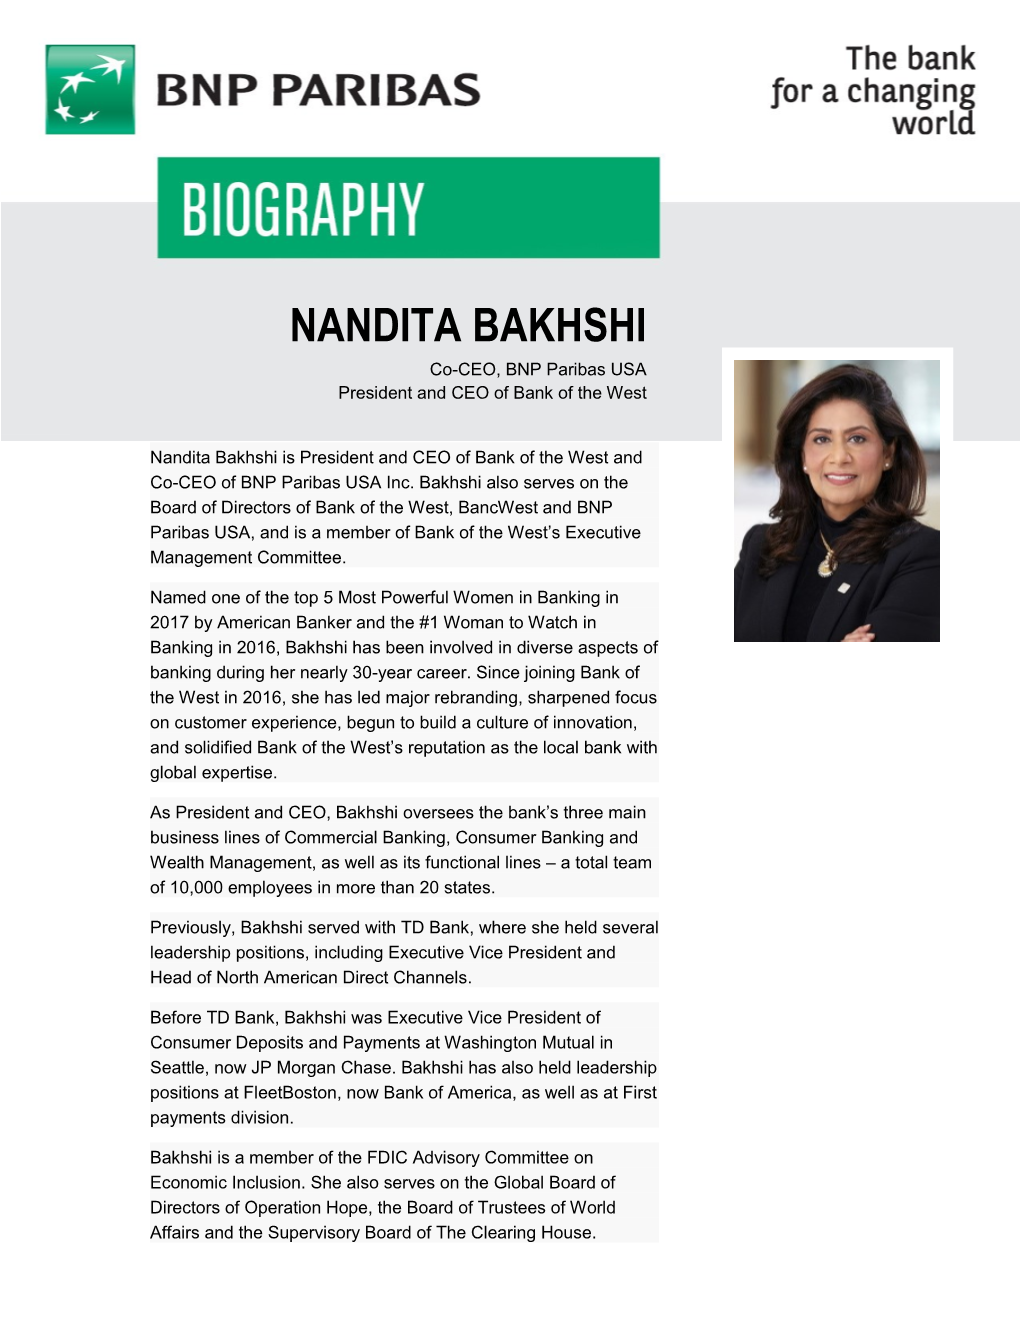 NANDITA BAKHSHI Co-CEO, BNP Paribas USA President and CEO of Bank of the West